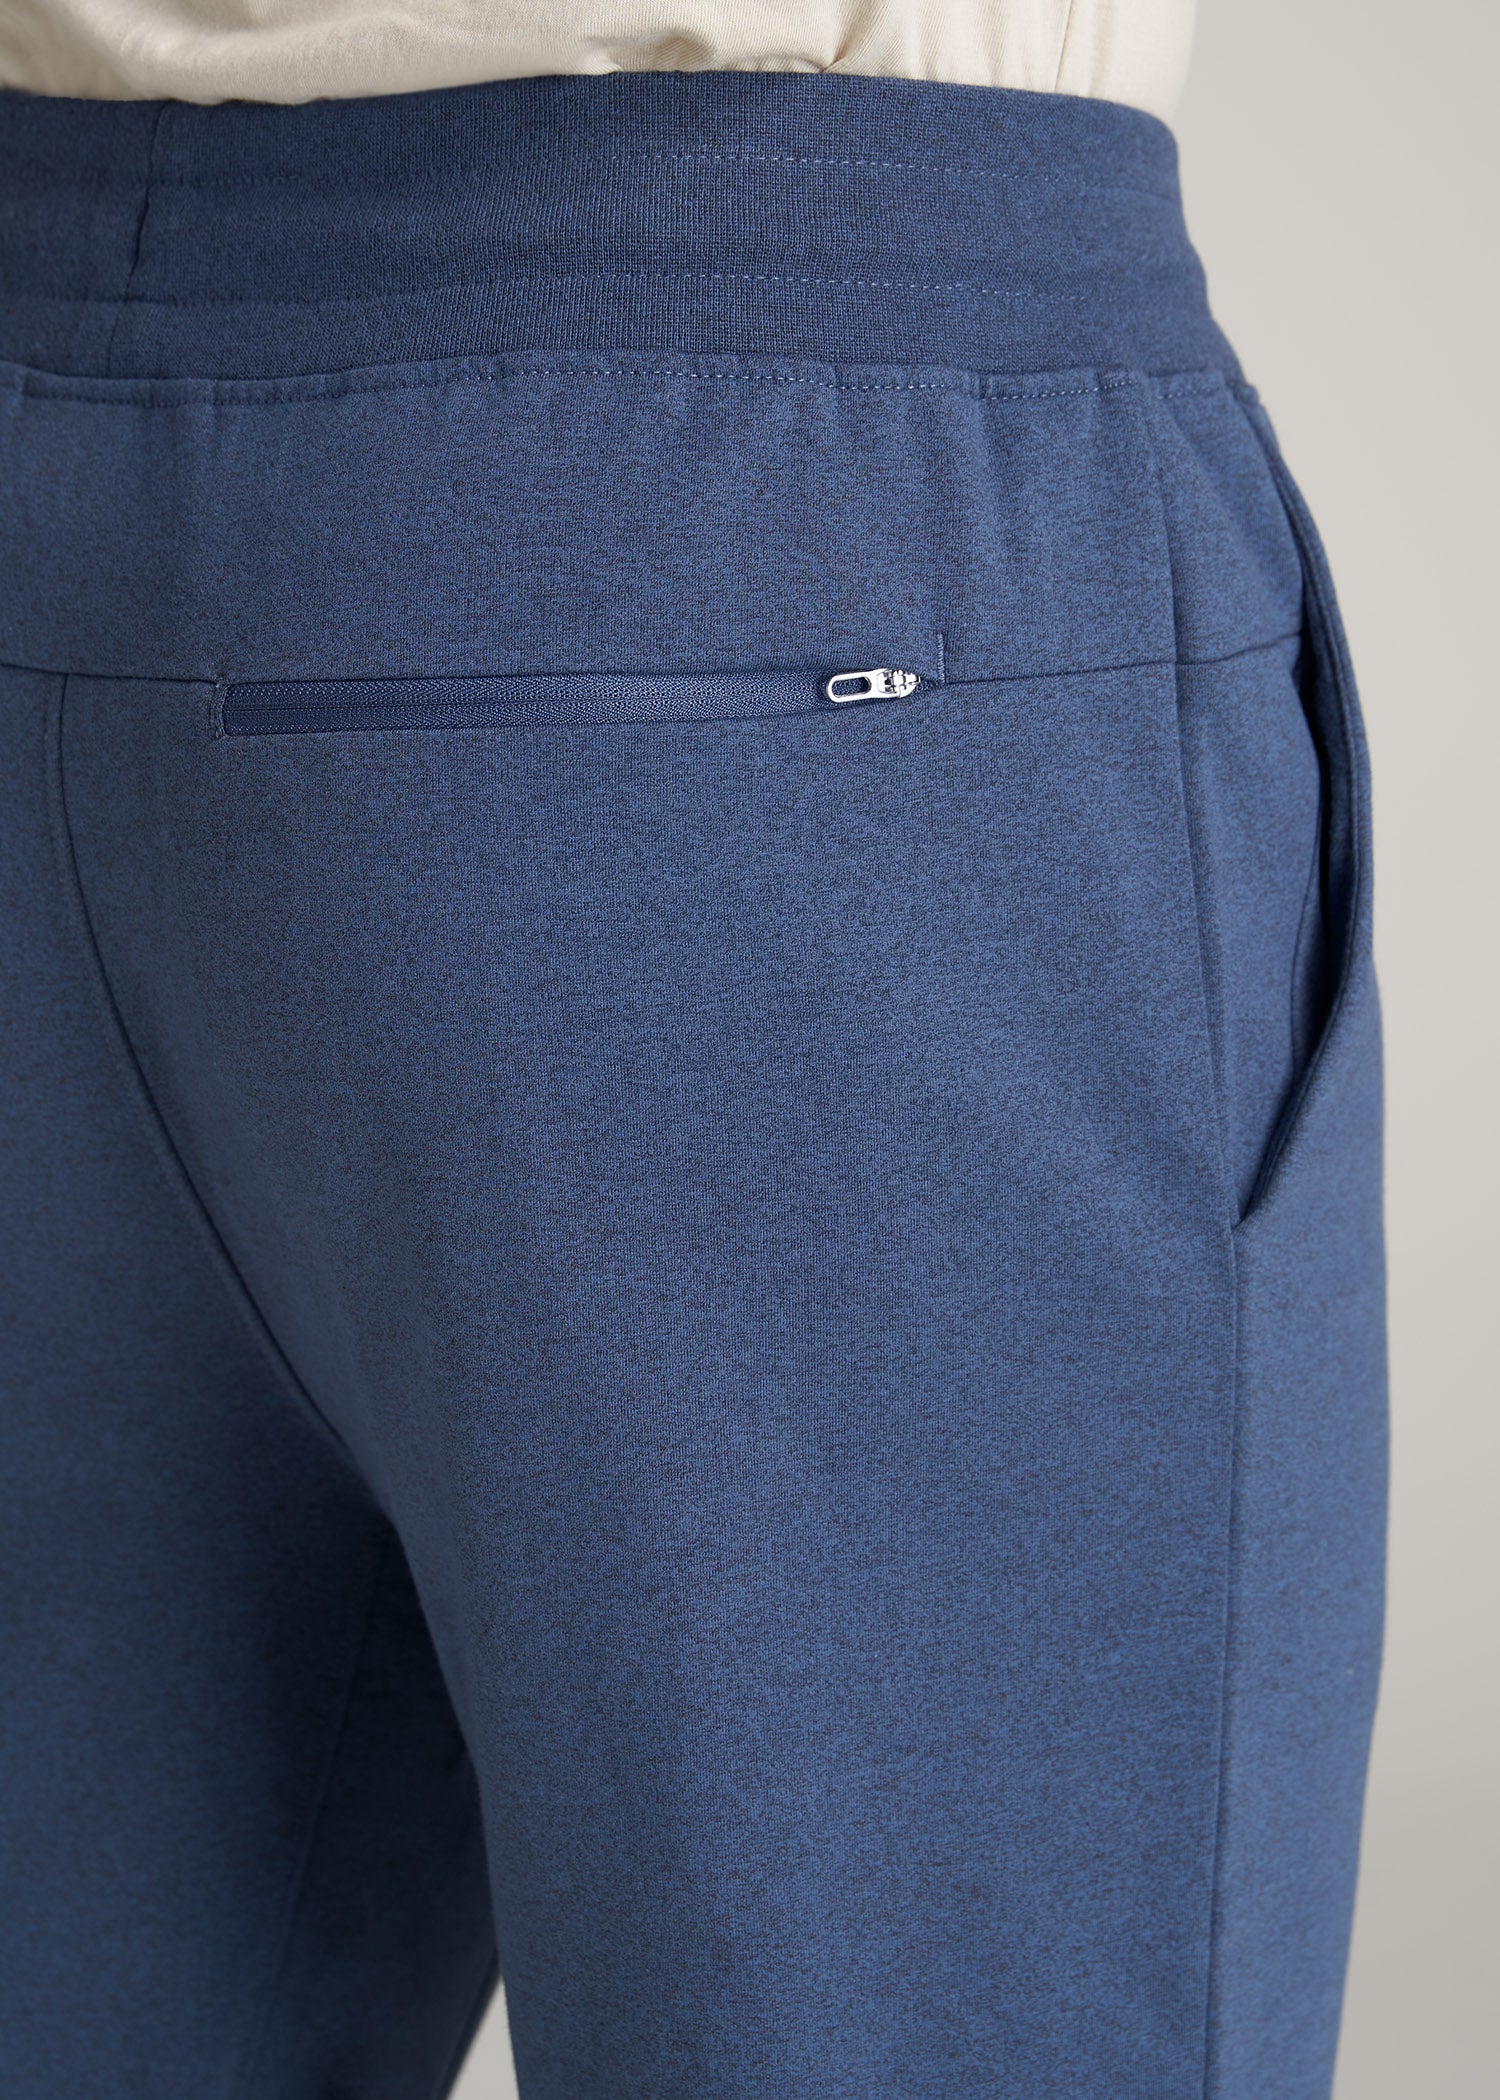 AT Performance French Terry Sweatpants for Tall Men in Tech Navy Mix